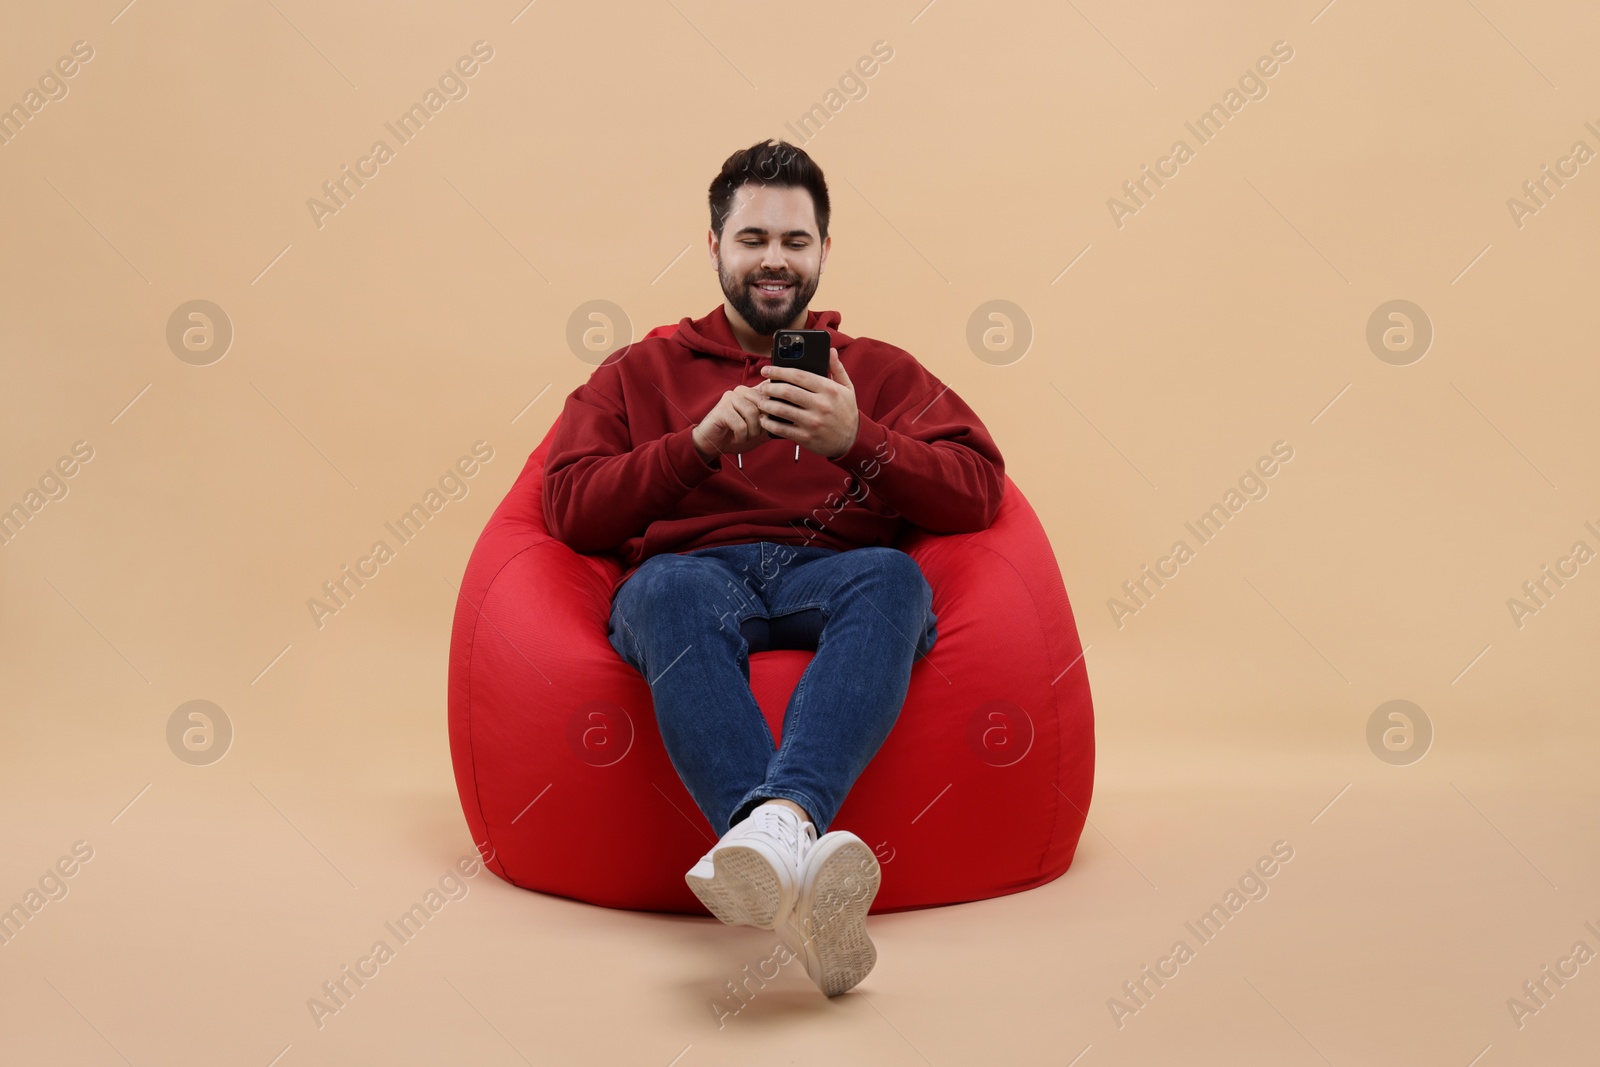 Photo of Happy young man using smartphone on bean bag chair against beige background